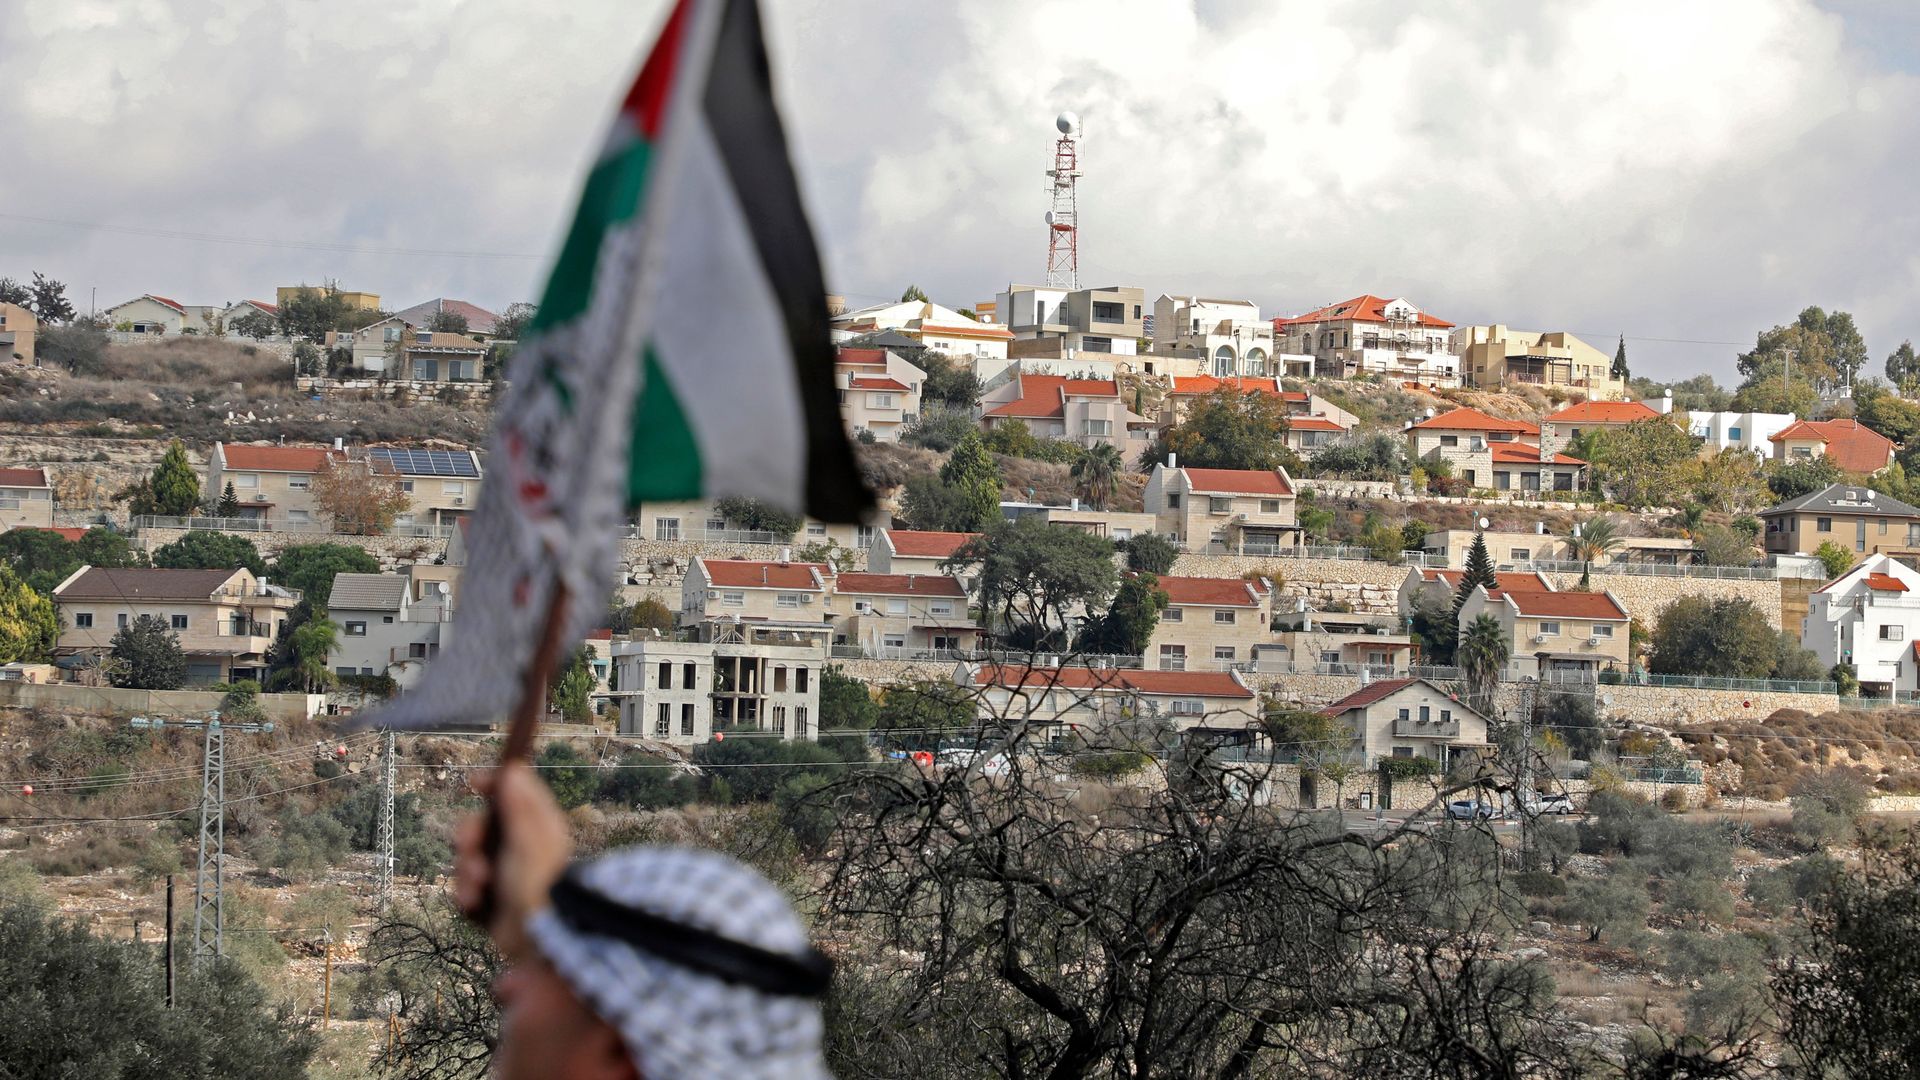 Palestinian protestor waves a flag in the West Bank